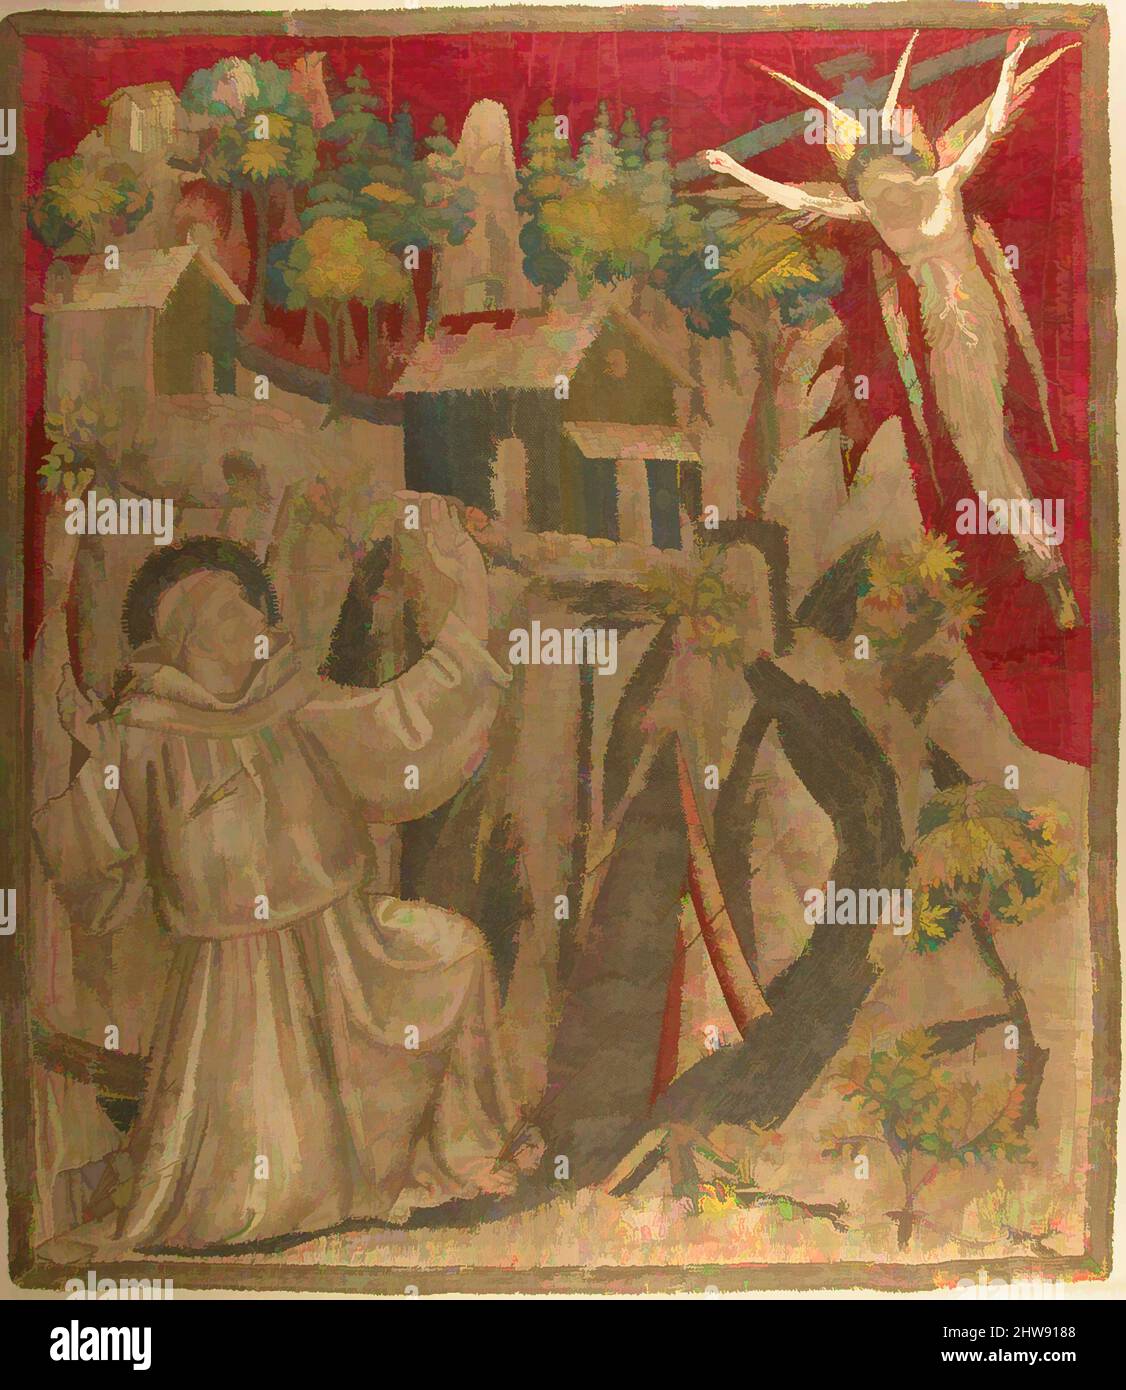 Art inspired by Textile with Saint Francis Receiving the Stigmata, late 14th century, Made in Tuscany, Italy, Italian, Colored silks, metal thread, Overall: 35 x 29 in. (88.9 x 73.7 cm), Textiles-Embroidered, According to his biographers, Saint Francis of Assisi enjoyed all the, Classic works modernized by Artotop with a splash of modernity. Shapes, color and value, eye-catching visual impact on art. Emotions through freedom of artworks in a contemporary way. A timeless message pursuing a wildly creative new direction. Artists turning to the digital medium and creating the Artotop NFT Stock Photo